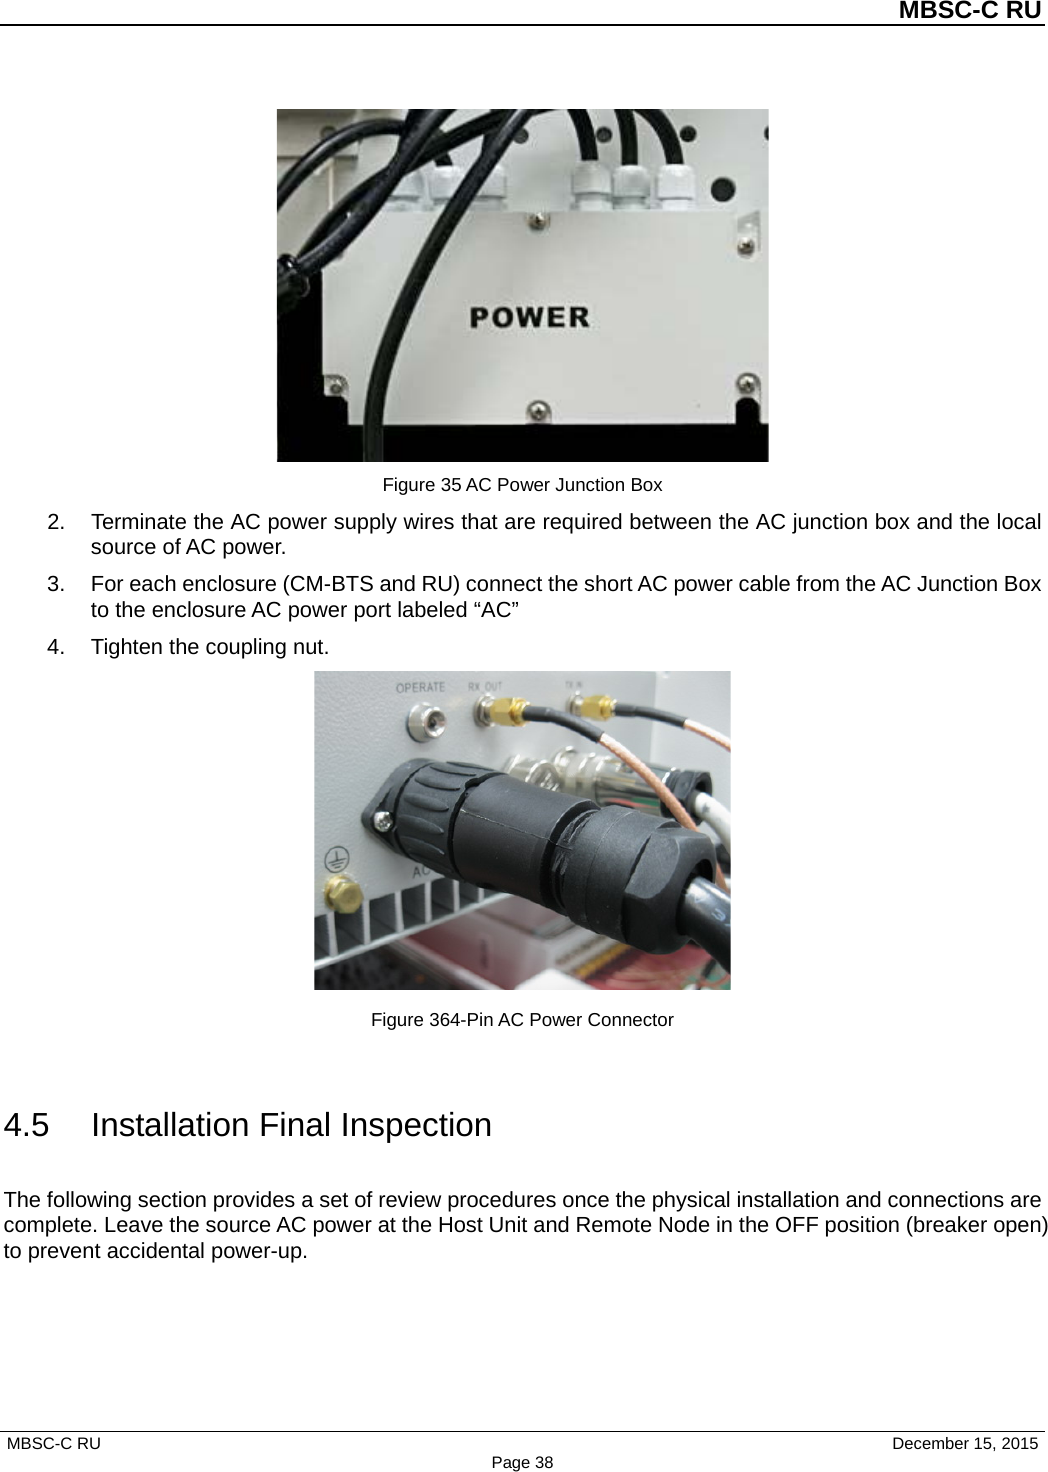          MBSC-C RU   MBSC-C RU                                     December 15, 2015 Page 38  Figure 35 AC Power Junction Box 2. Terminate the AC power supply wires that are required between the AC junction box and the local source of AC power. 3. For each enclosure (CM-BTS and RU) connect the short AC power cable from the AC Junction Box to the enclosure AC power port labeled “AC” 4.  Tighten the coupling nut.  Figure 364-Pin AC Power Connector  4.5 Installation Final Inspection The following section provides a set of review procedures once the physical installation and connections are complete. Leave the source AC power at the Host Unit and Remote Node in the OFF position (breaker open) to prevent accidental power-up. 